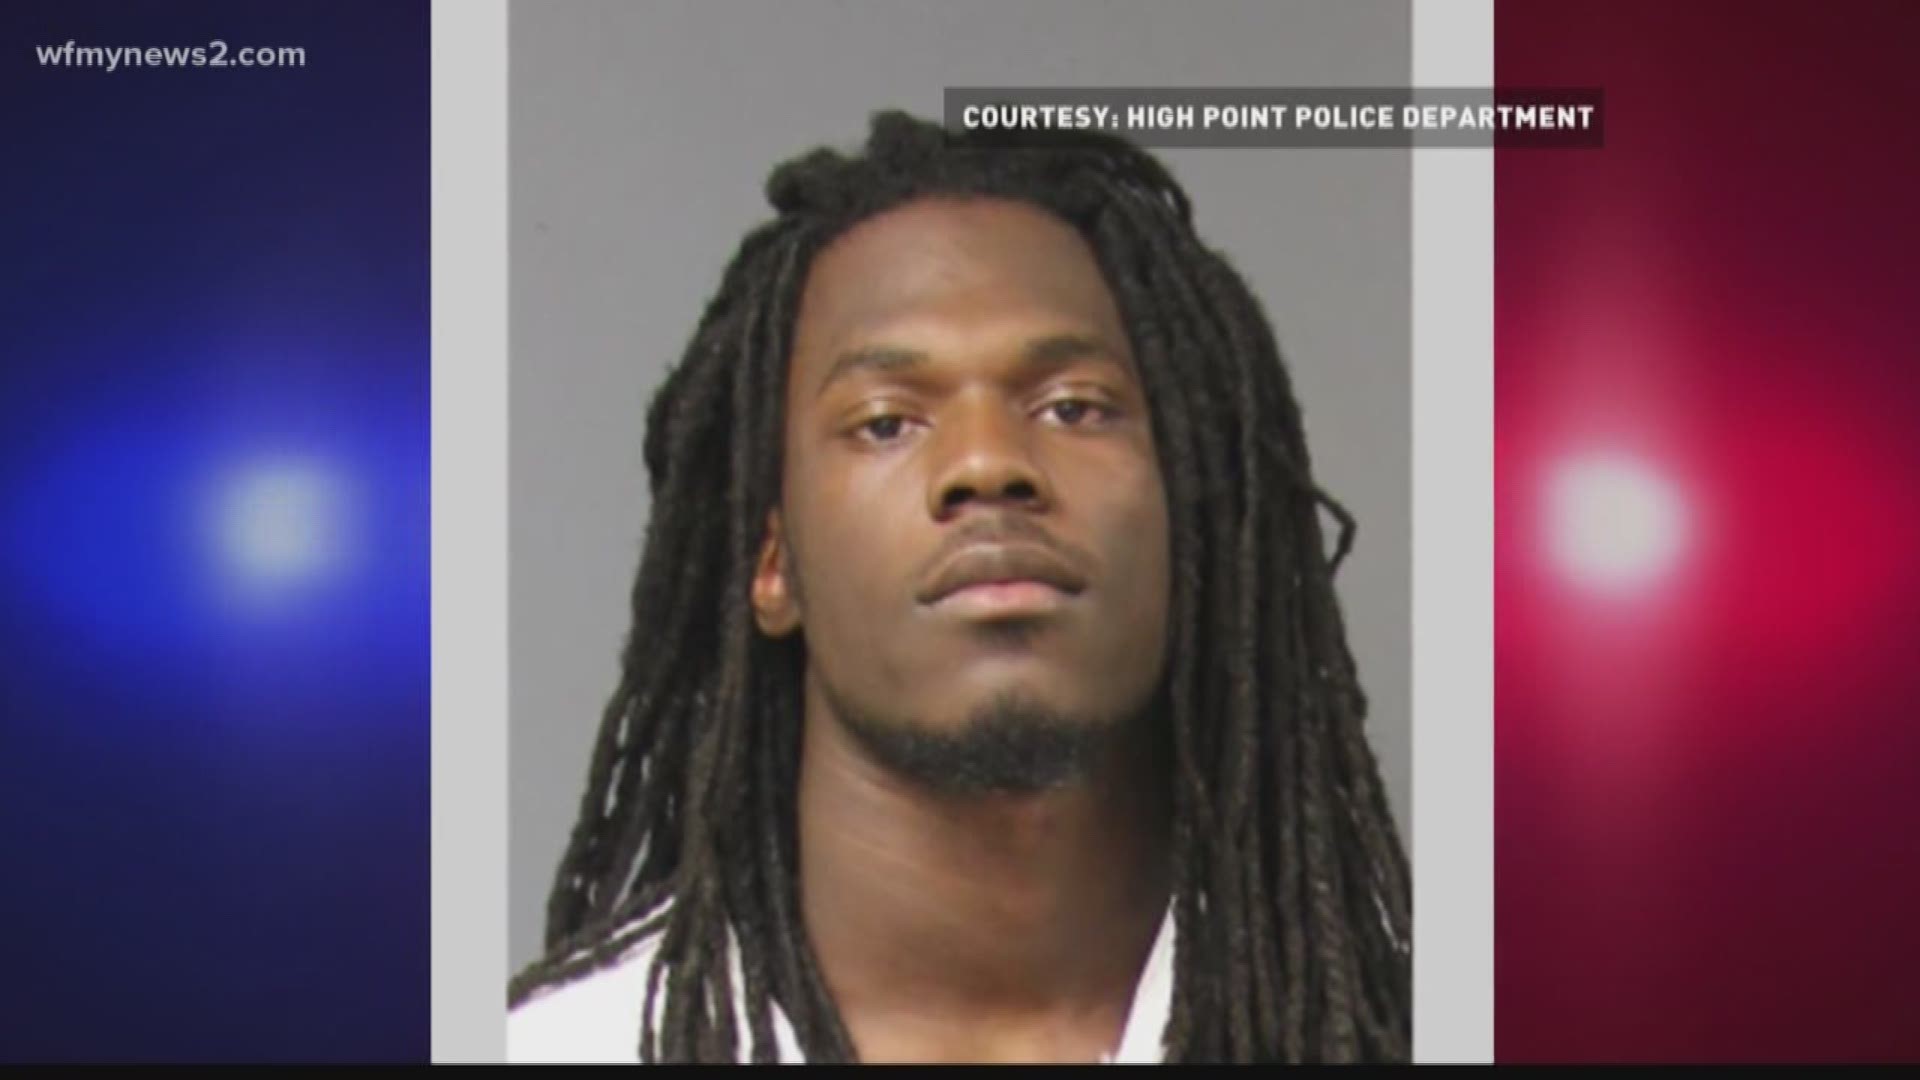 Police say Tavio Whitehead is connected to 5 rape cases. As we break down the crimes he’s accused of, we also spoke with the Family Justice Center for advice on seeking help.